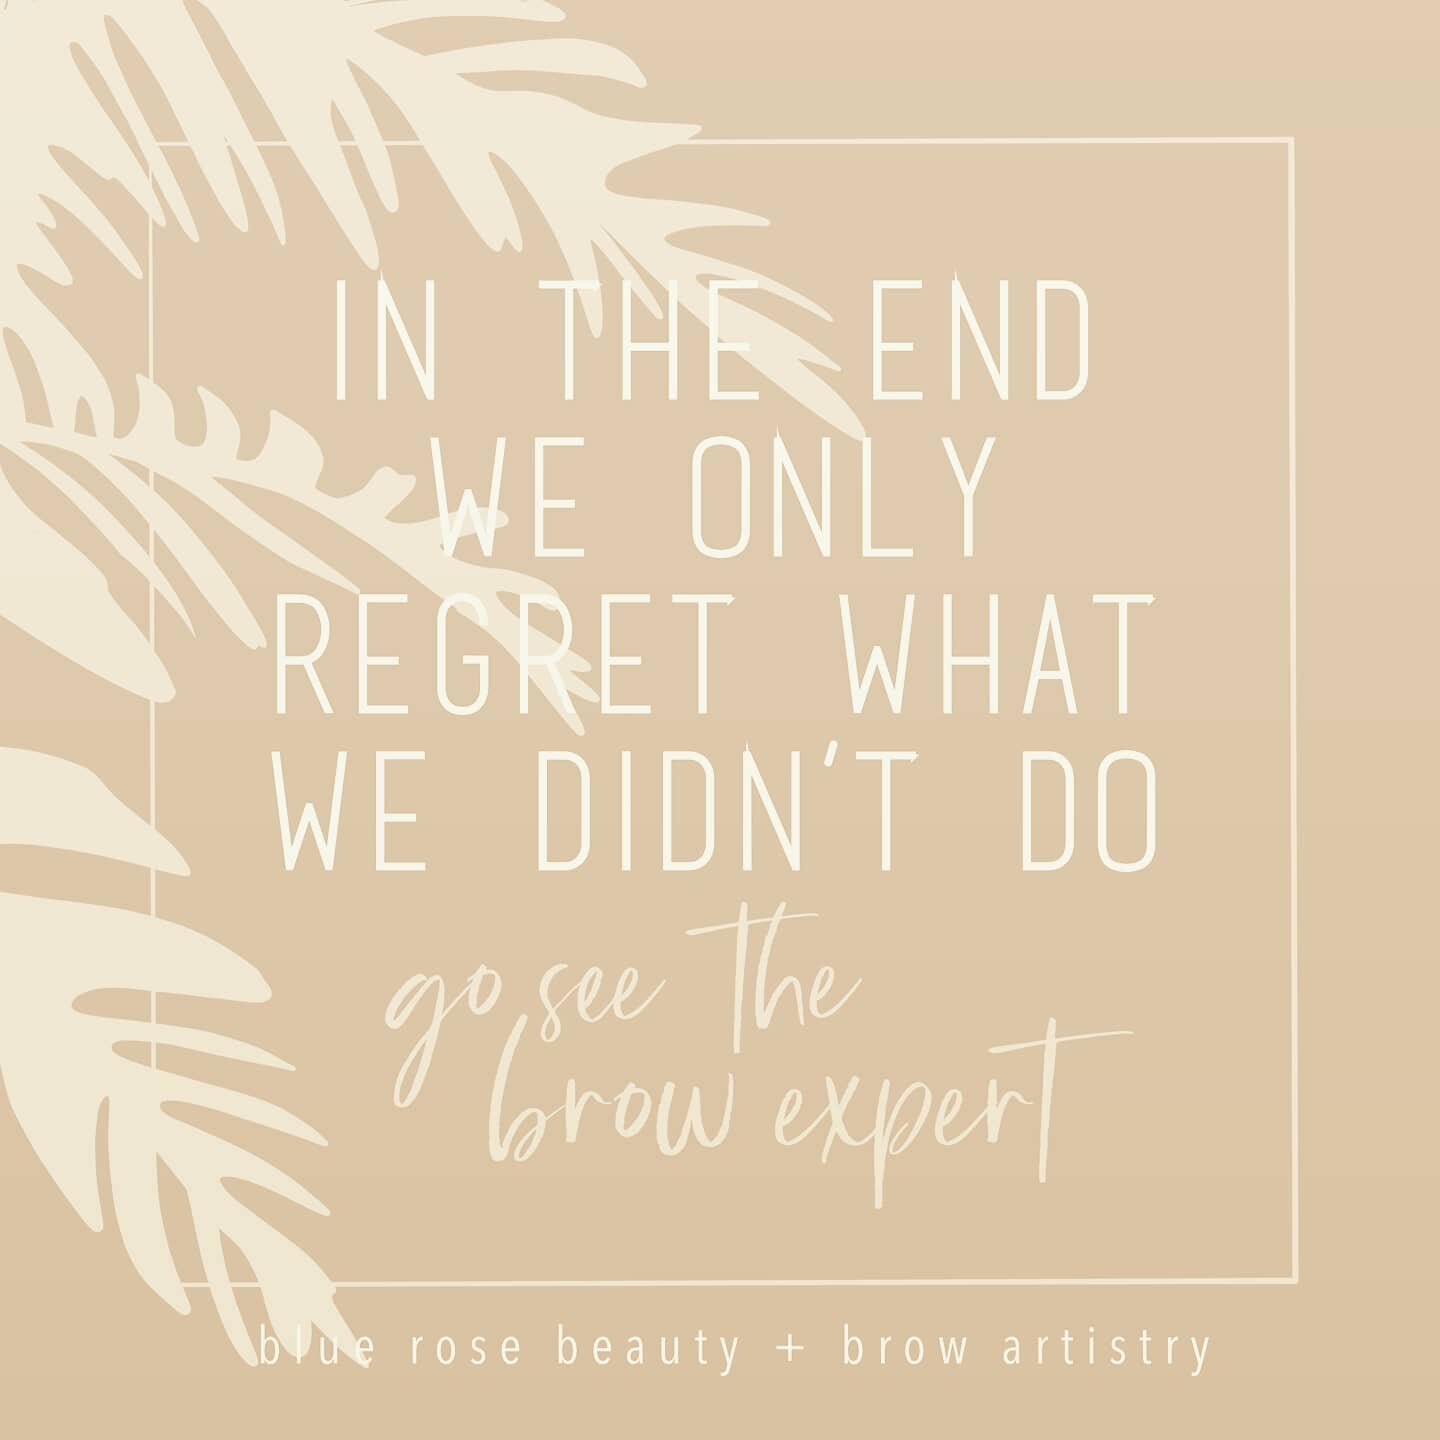 Just come see us! So often I hear in the background as I am working away on my clients &quot;my brows never looked this good!&quot; 

This is the difference of seeing a true brow artist for your brow services! 

Book today using the mindbody app! 
No